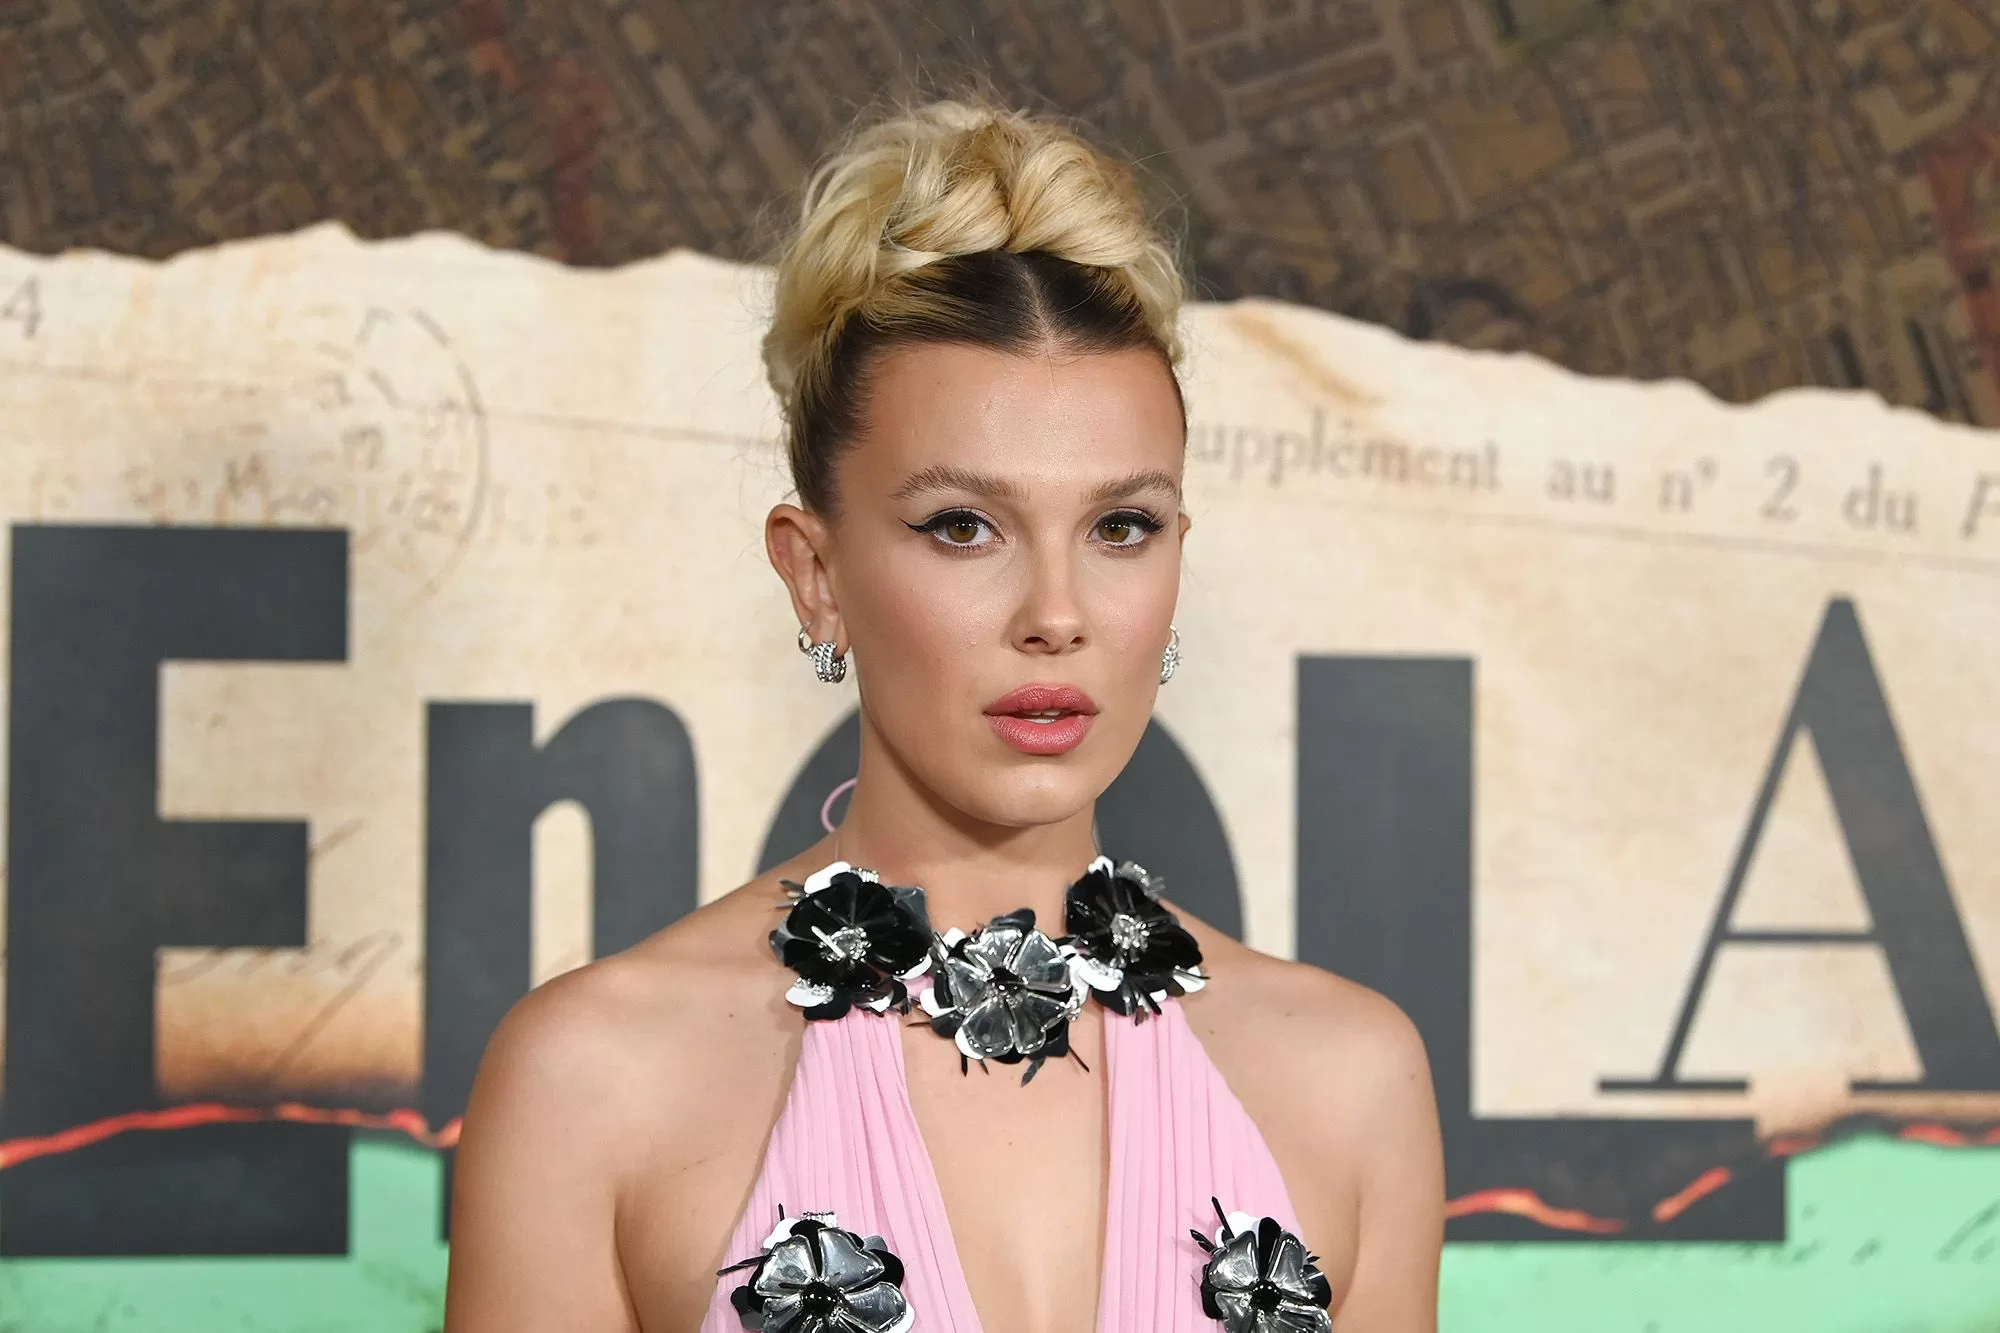 Millie Bobby Brown Biography: Age, Net Worth, Boyfriend, Parents, Family, Height and Controversy